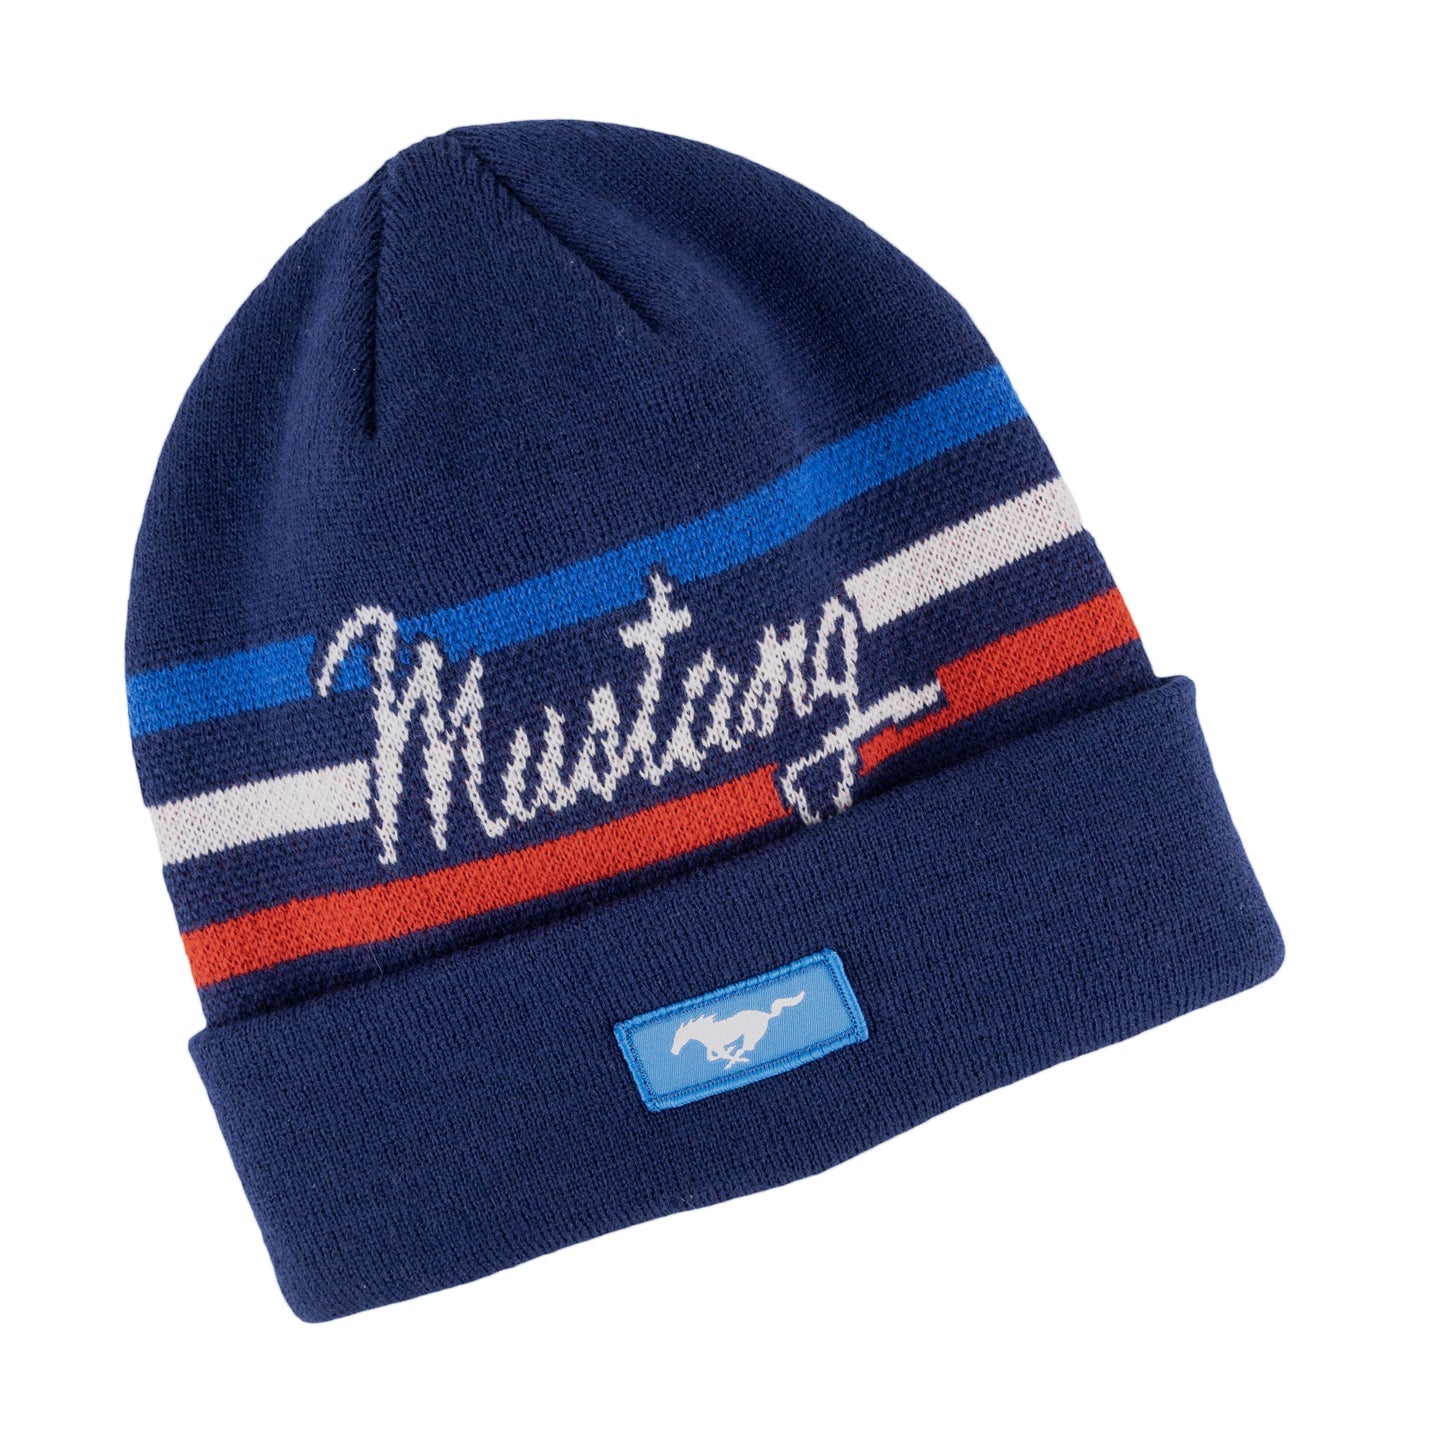 Stripe Mustang Merchandise Hat- Official Knit Ford Ford